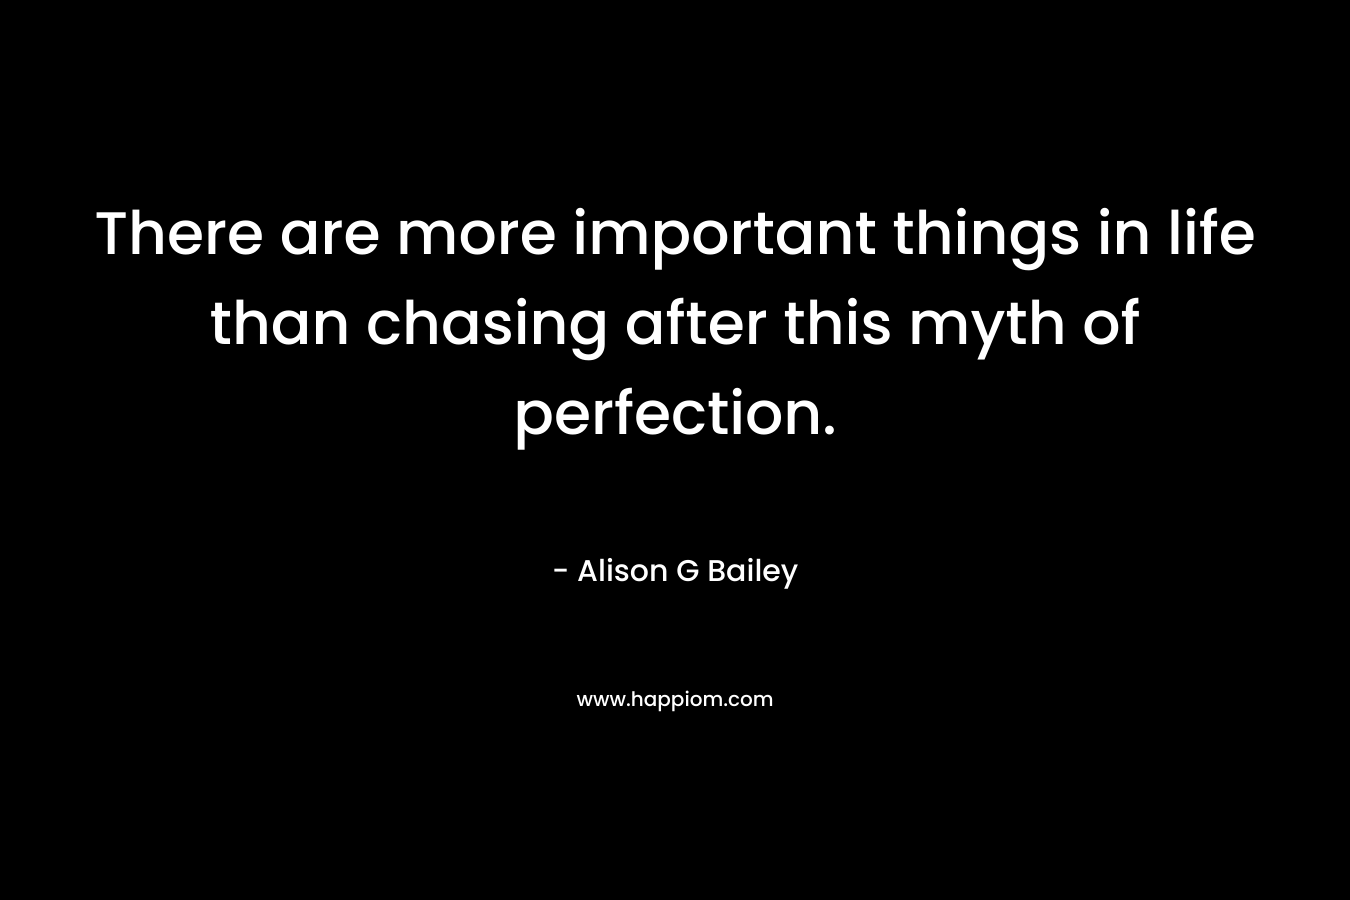 There are more important things in life than chasing after this myth of perfection. – Alison G Bailey